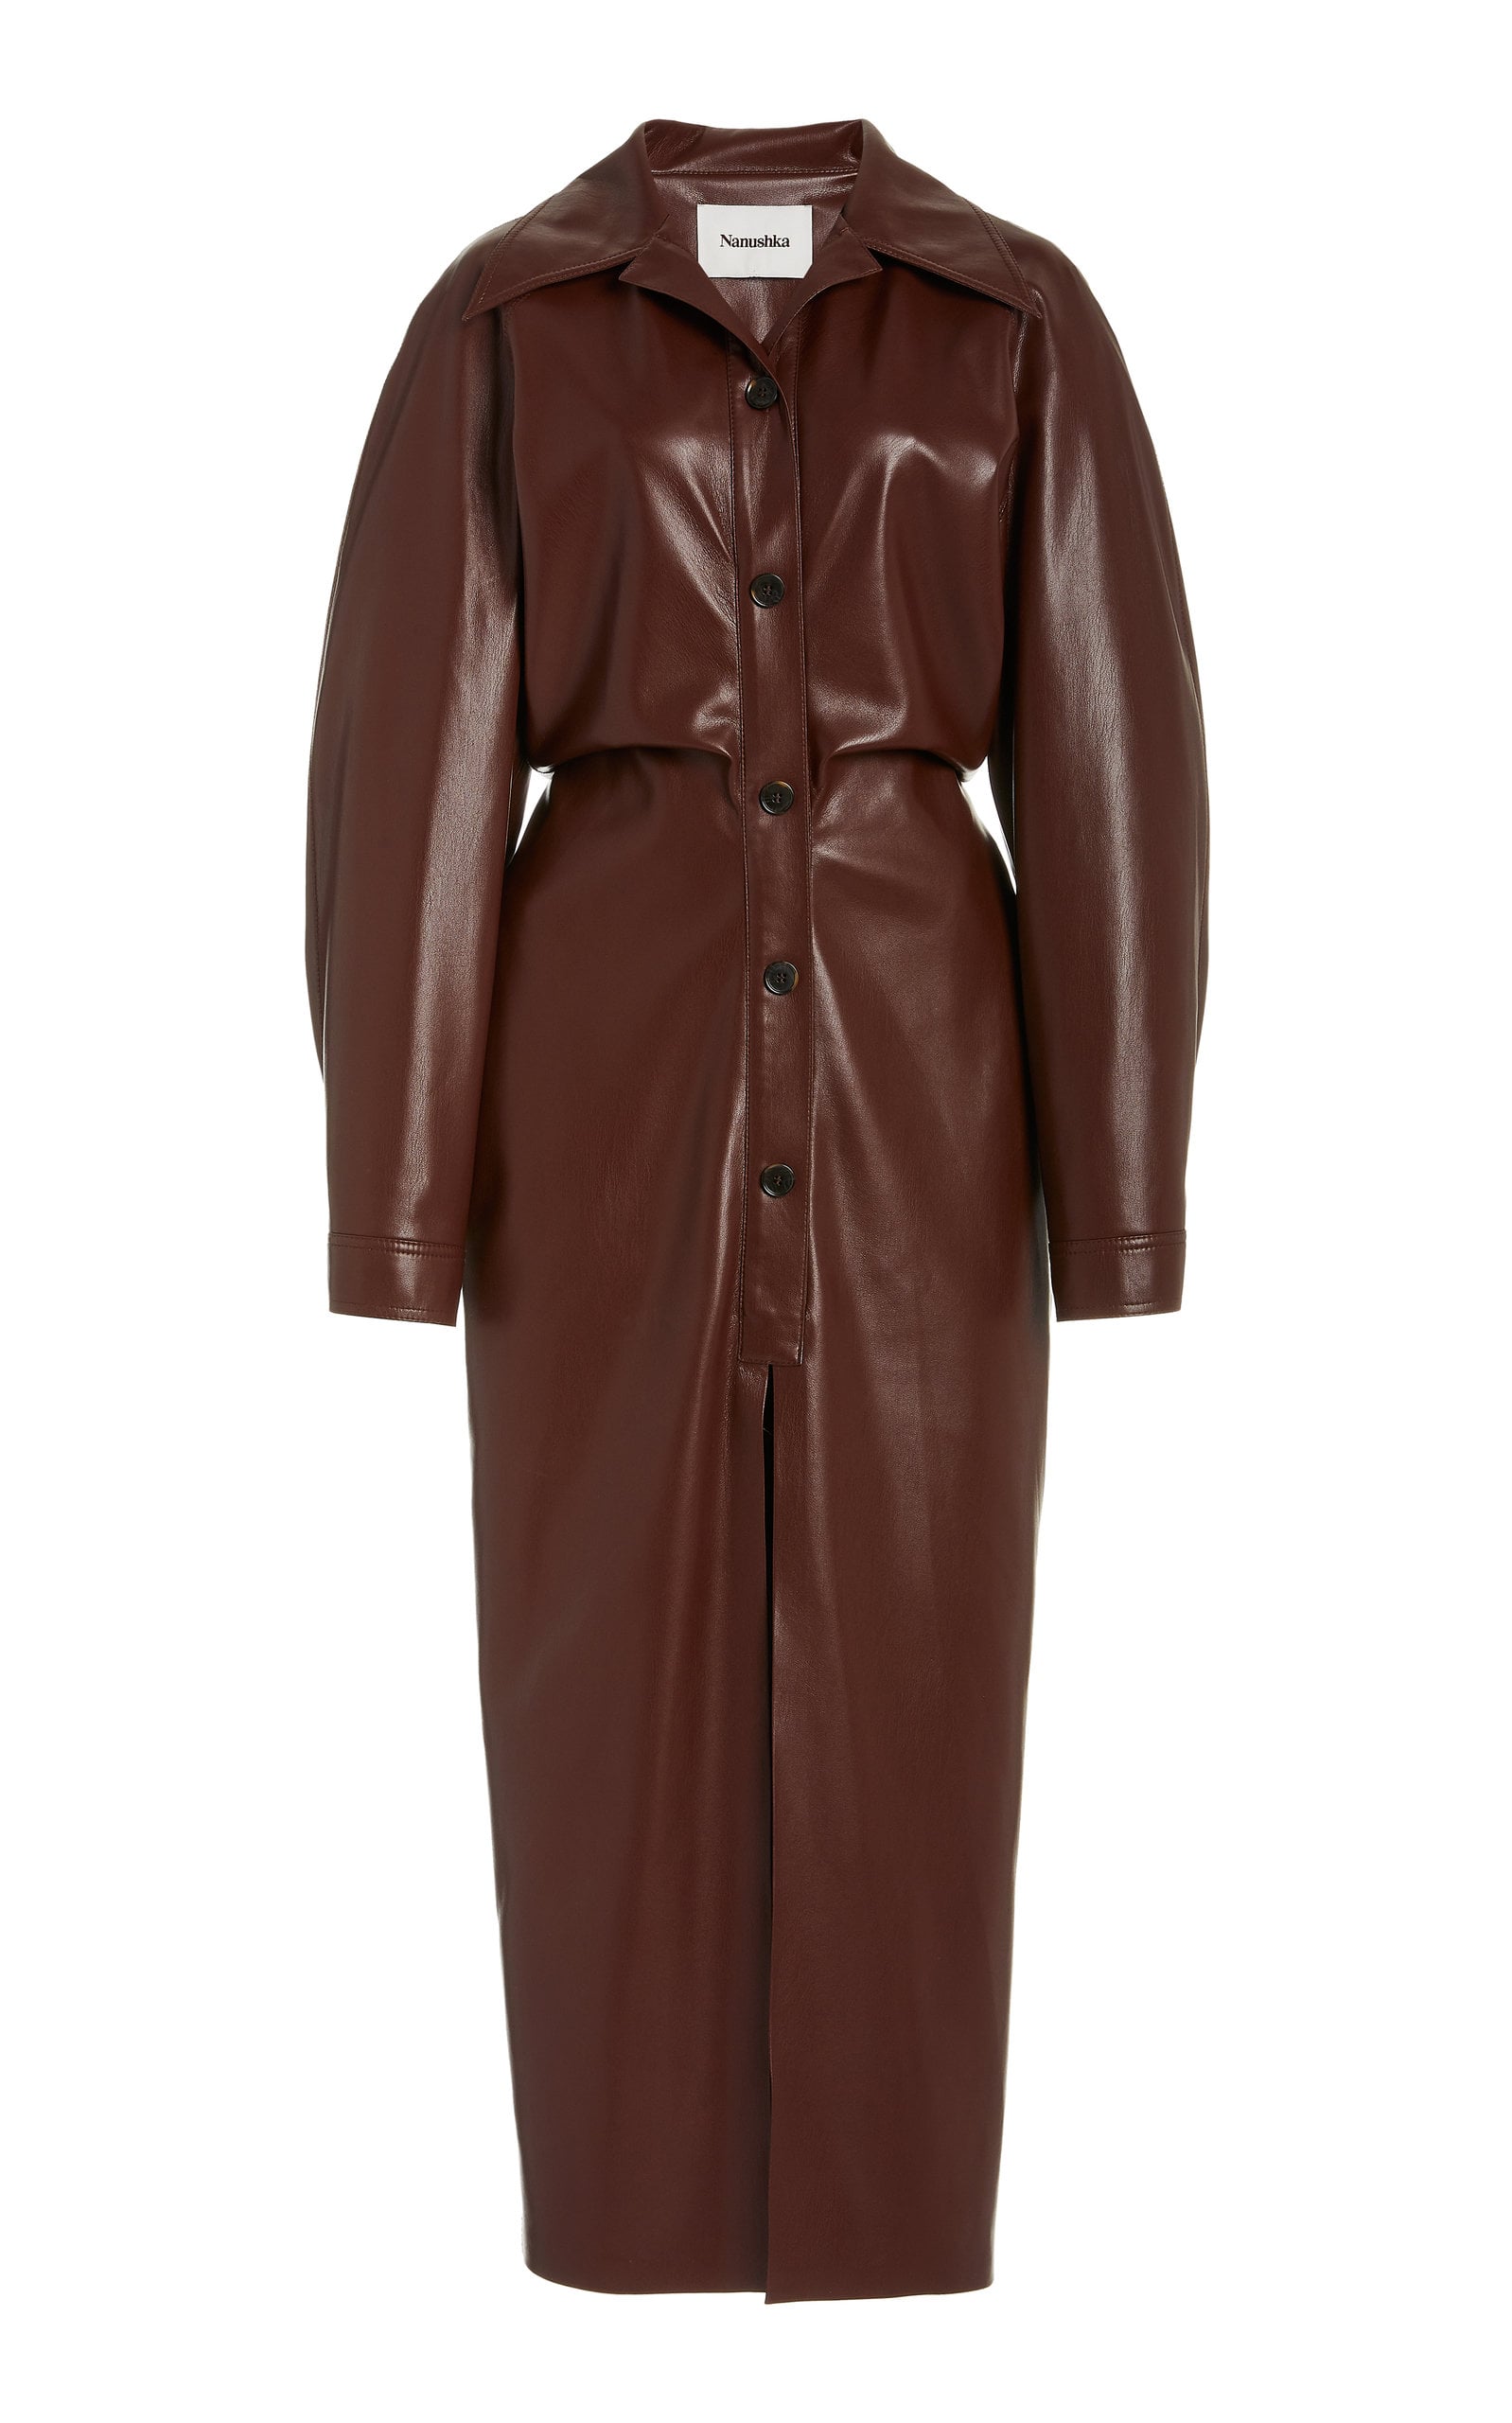 Louis VuittonRed Leather Trench Coat  Red leather dress, Leather trench  coat, Coats for women